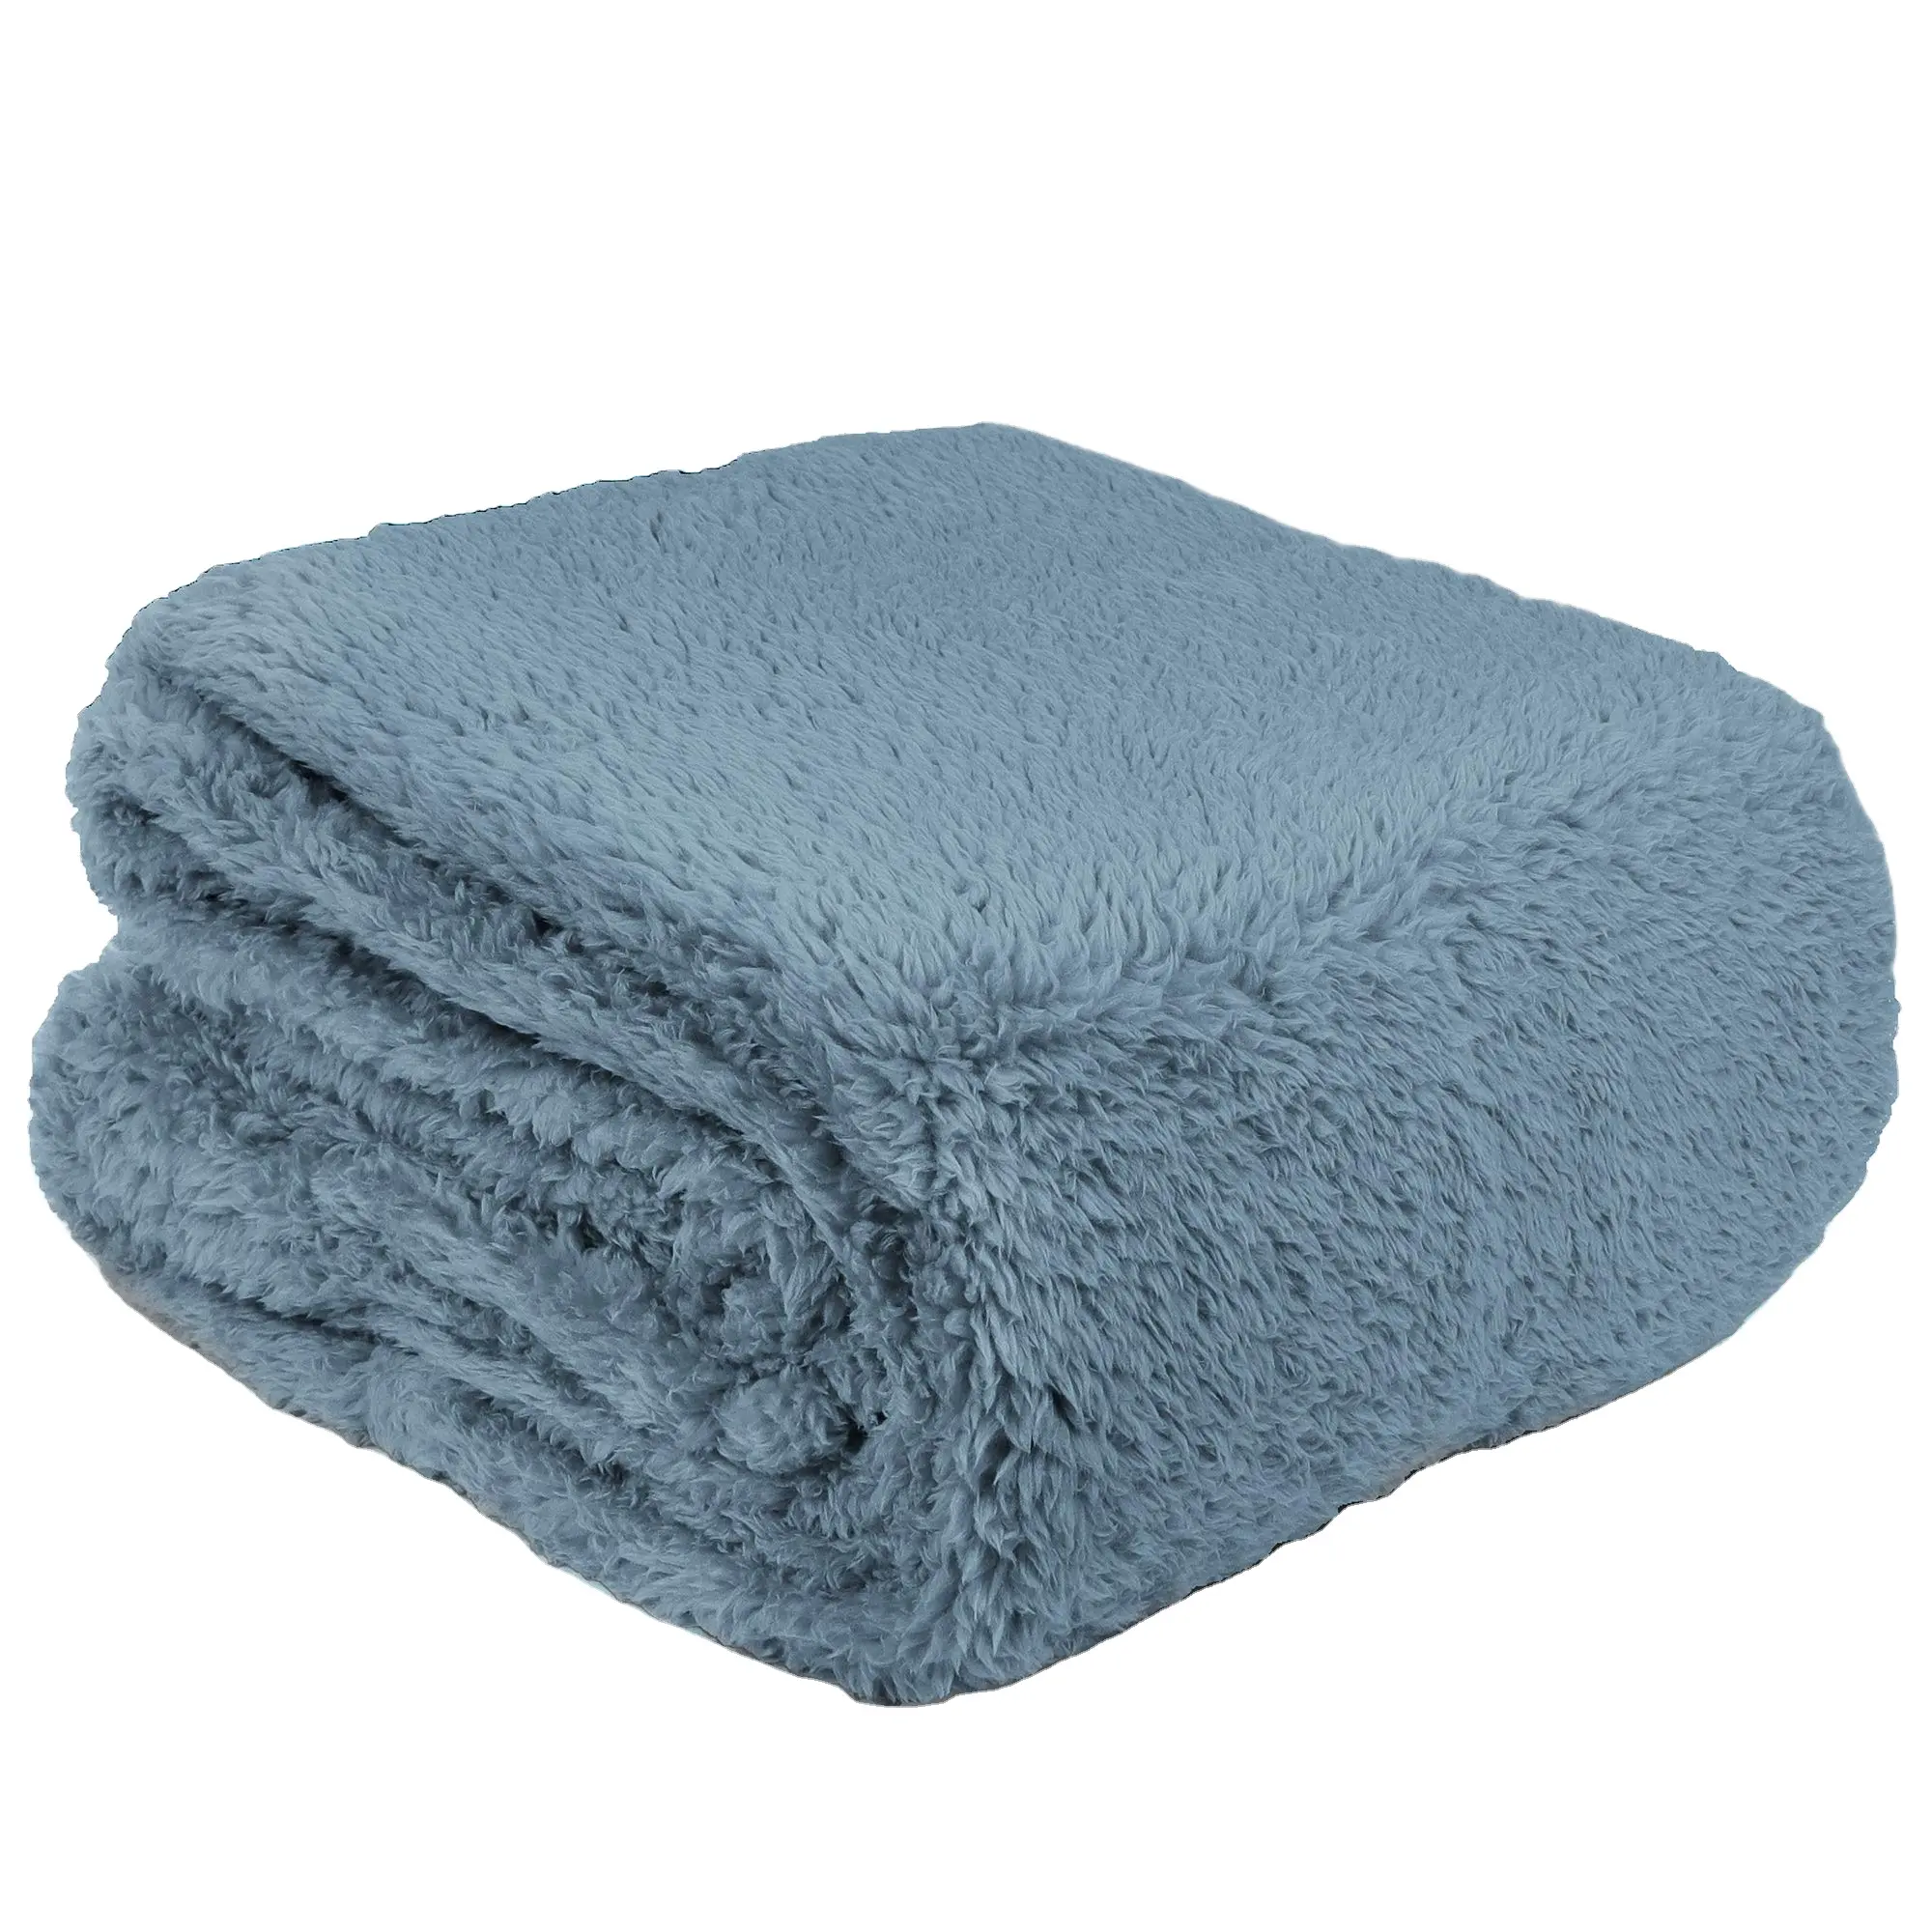 Ultra Soft and Comfortable Blue Throw Blanket Warm Cozy Plush Fleece Sherpa Blanket Throw for Bed Sofa Couch